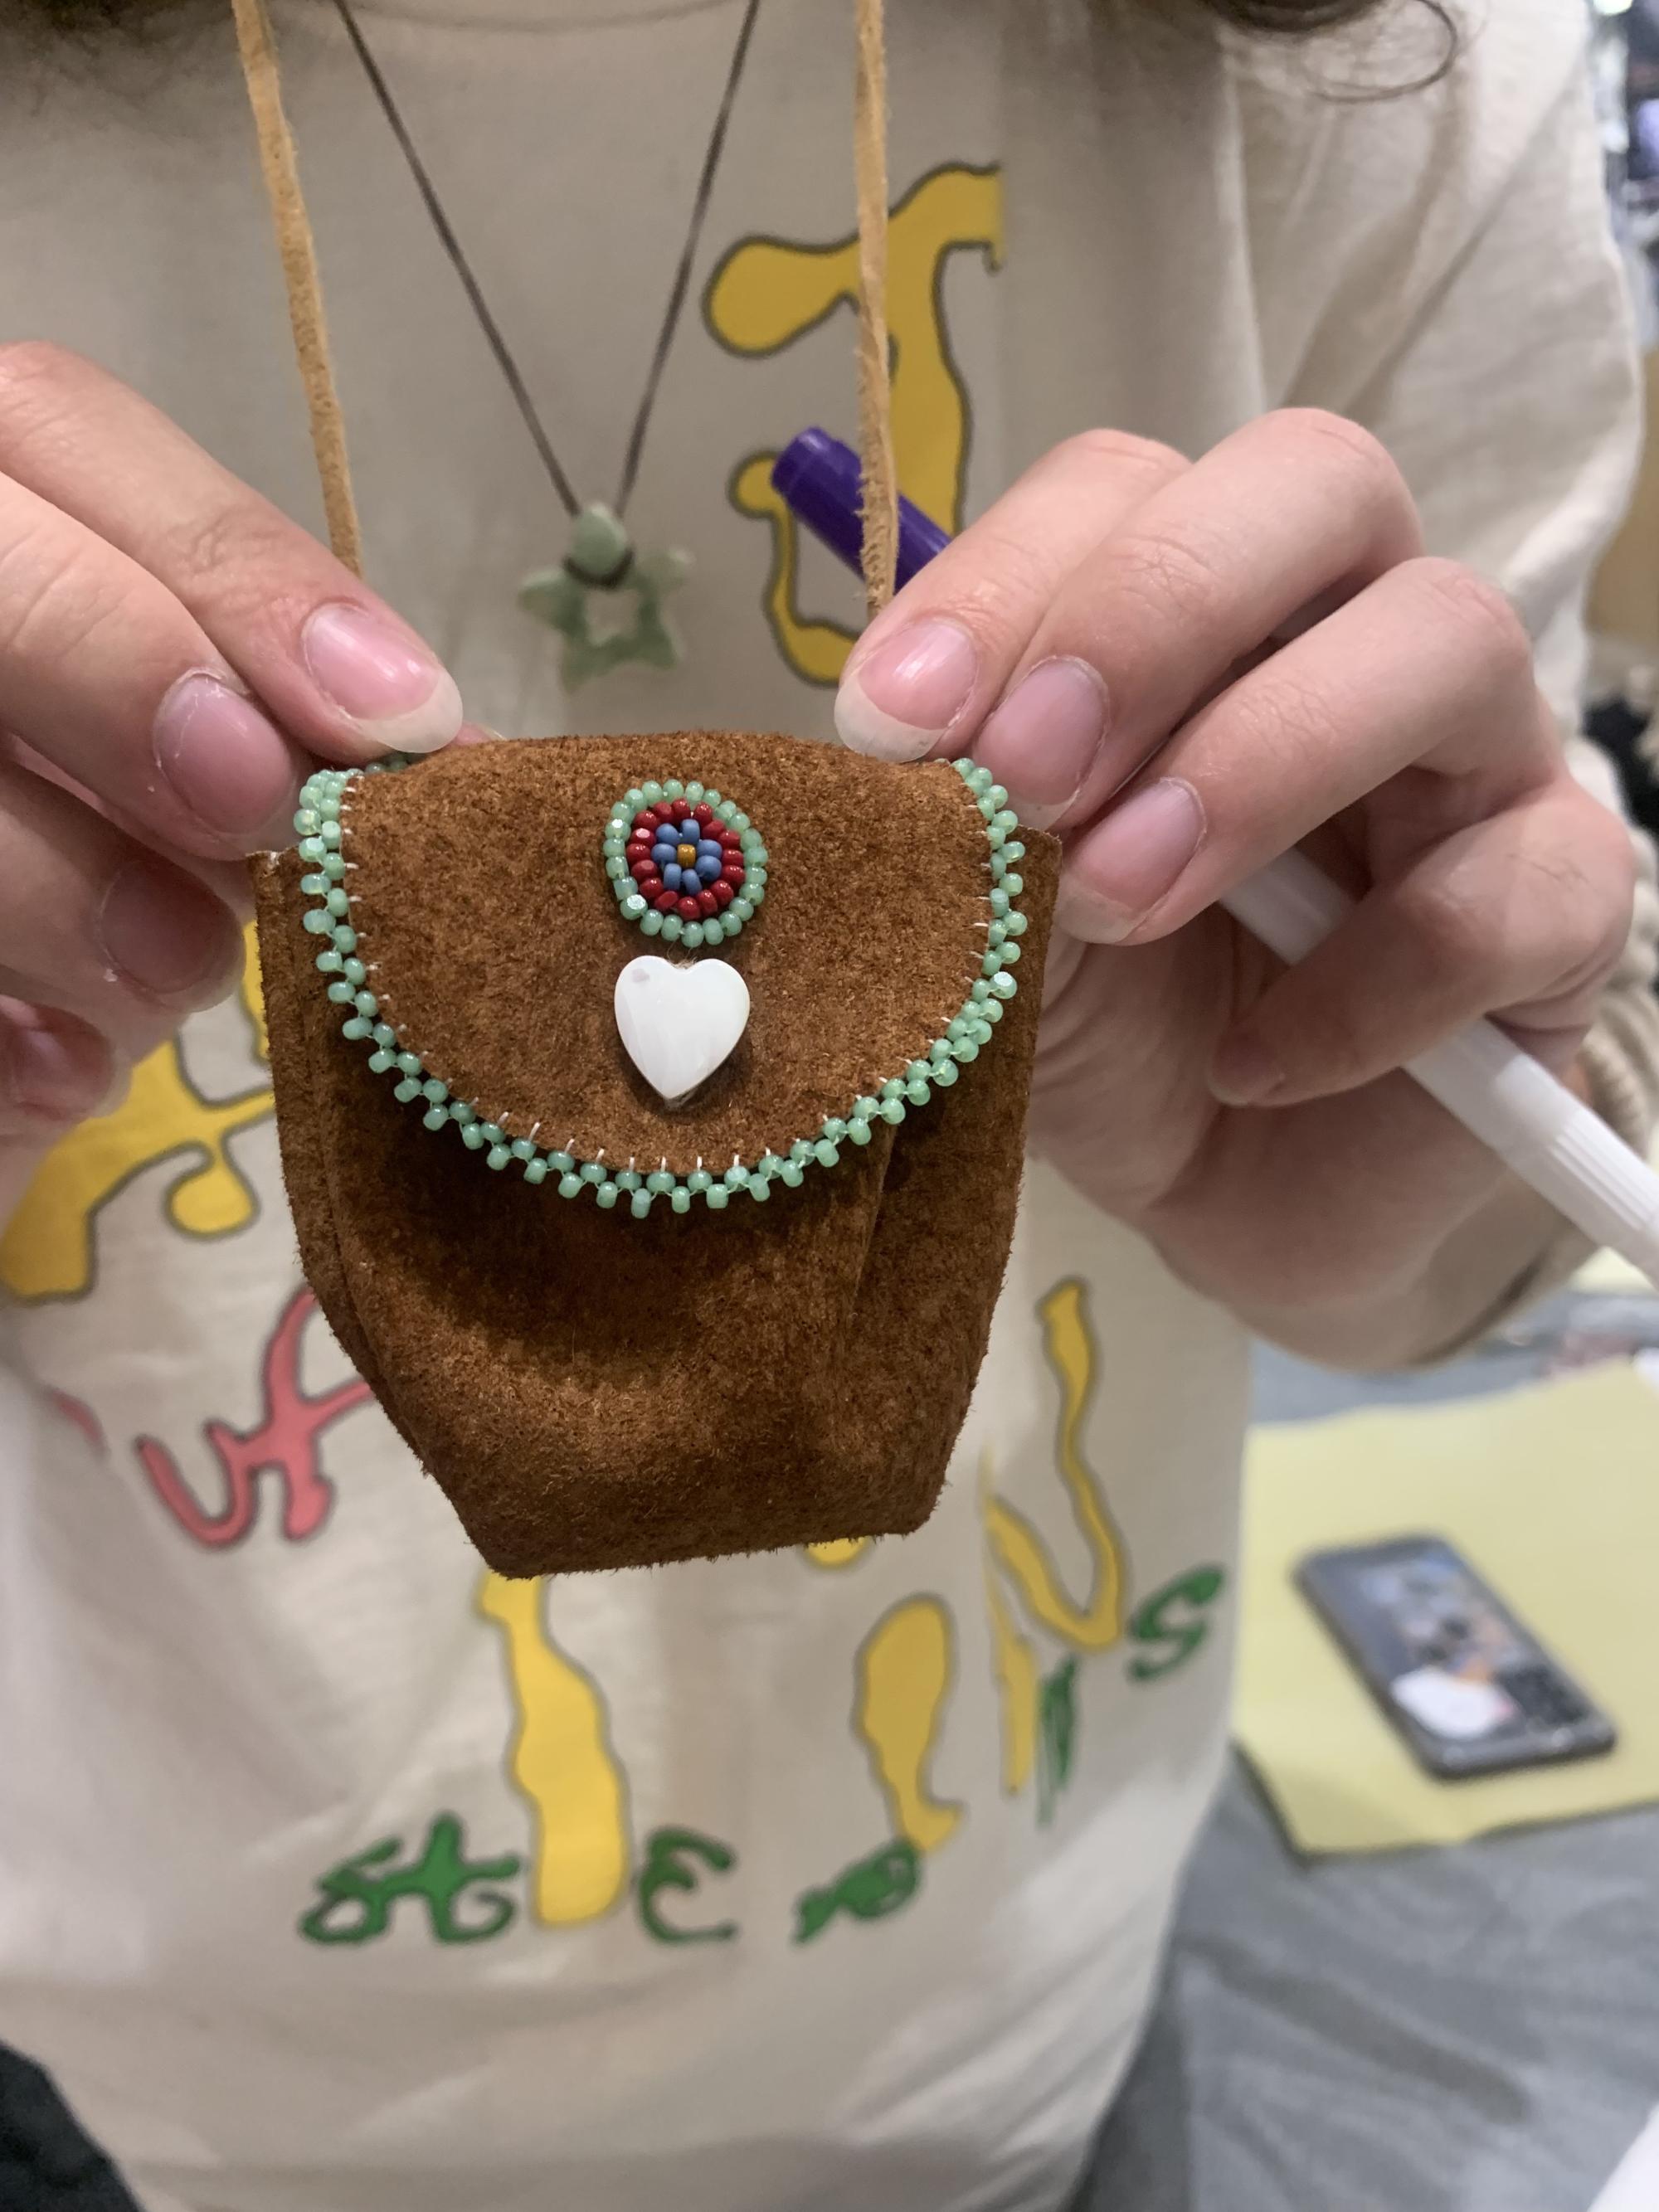 [ID: "Workshop participant holding up the beaded medicine bag that is hanging from their neck. The light brown leather medicine bag is beaded along the edges with green and white beads, has a white heart button closure, and a circular beaded detail."]